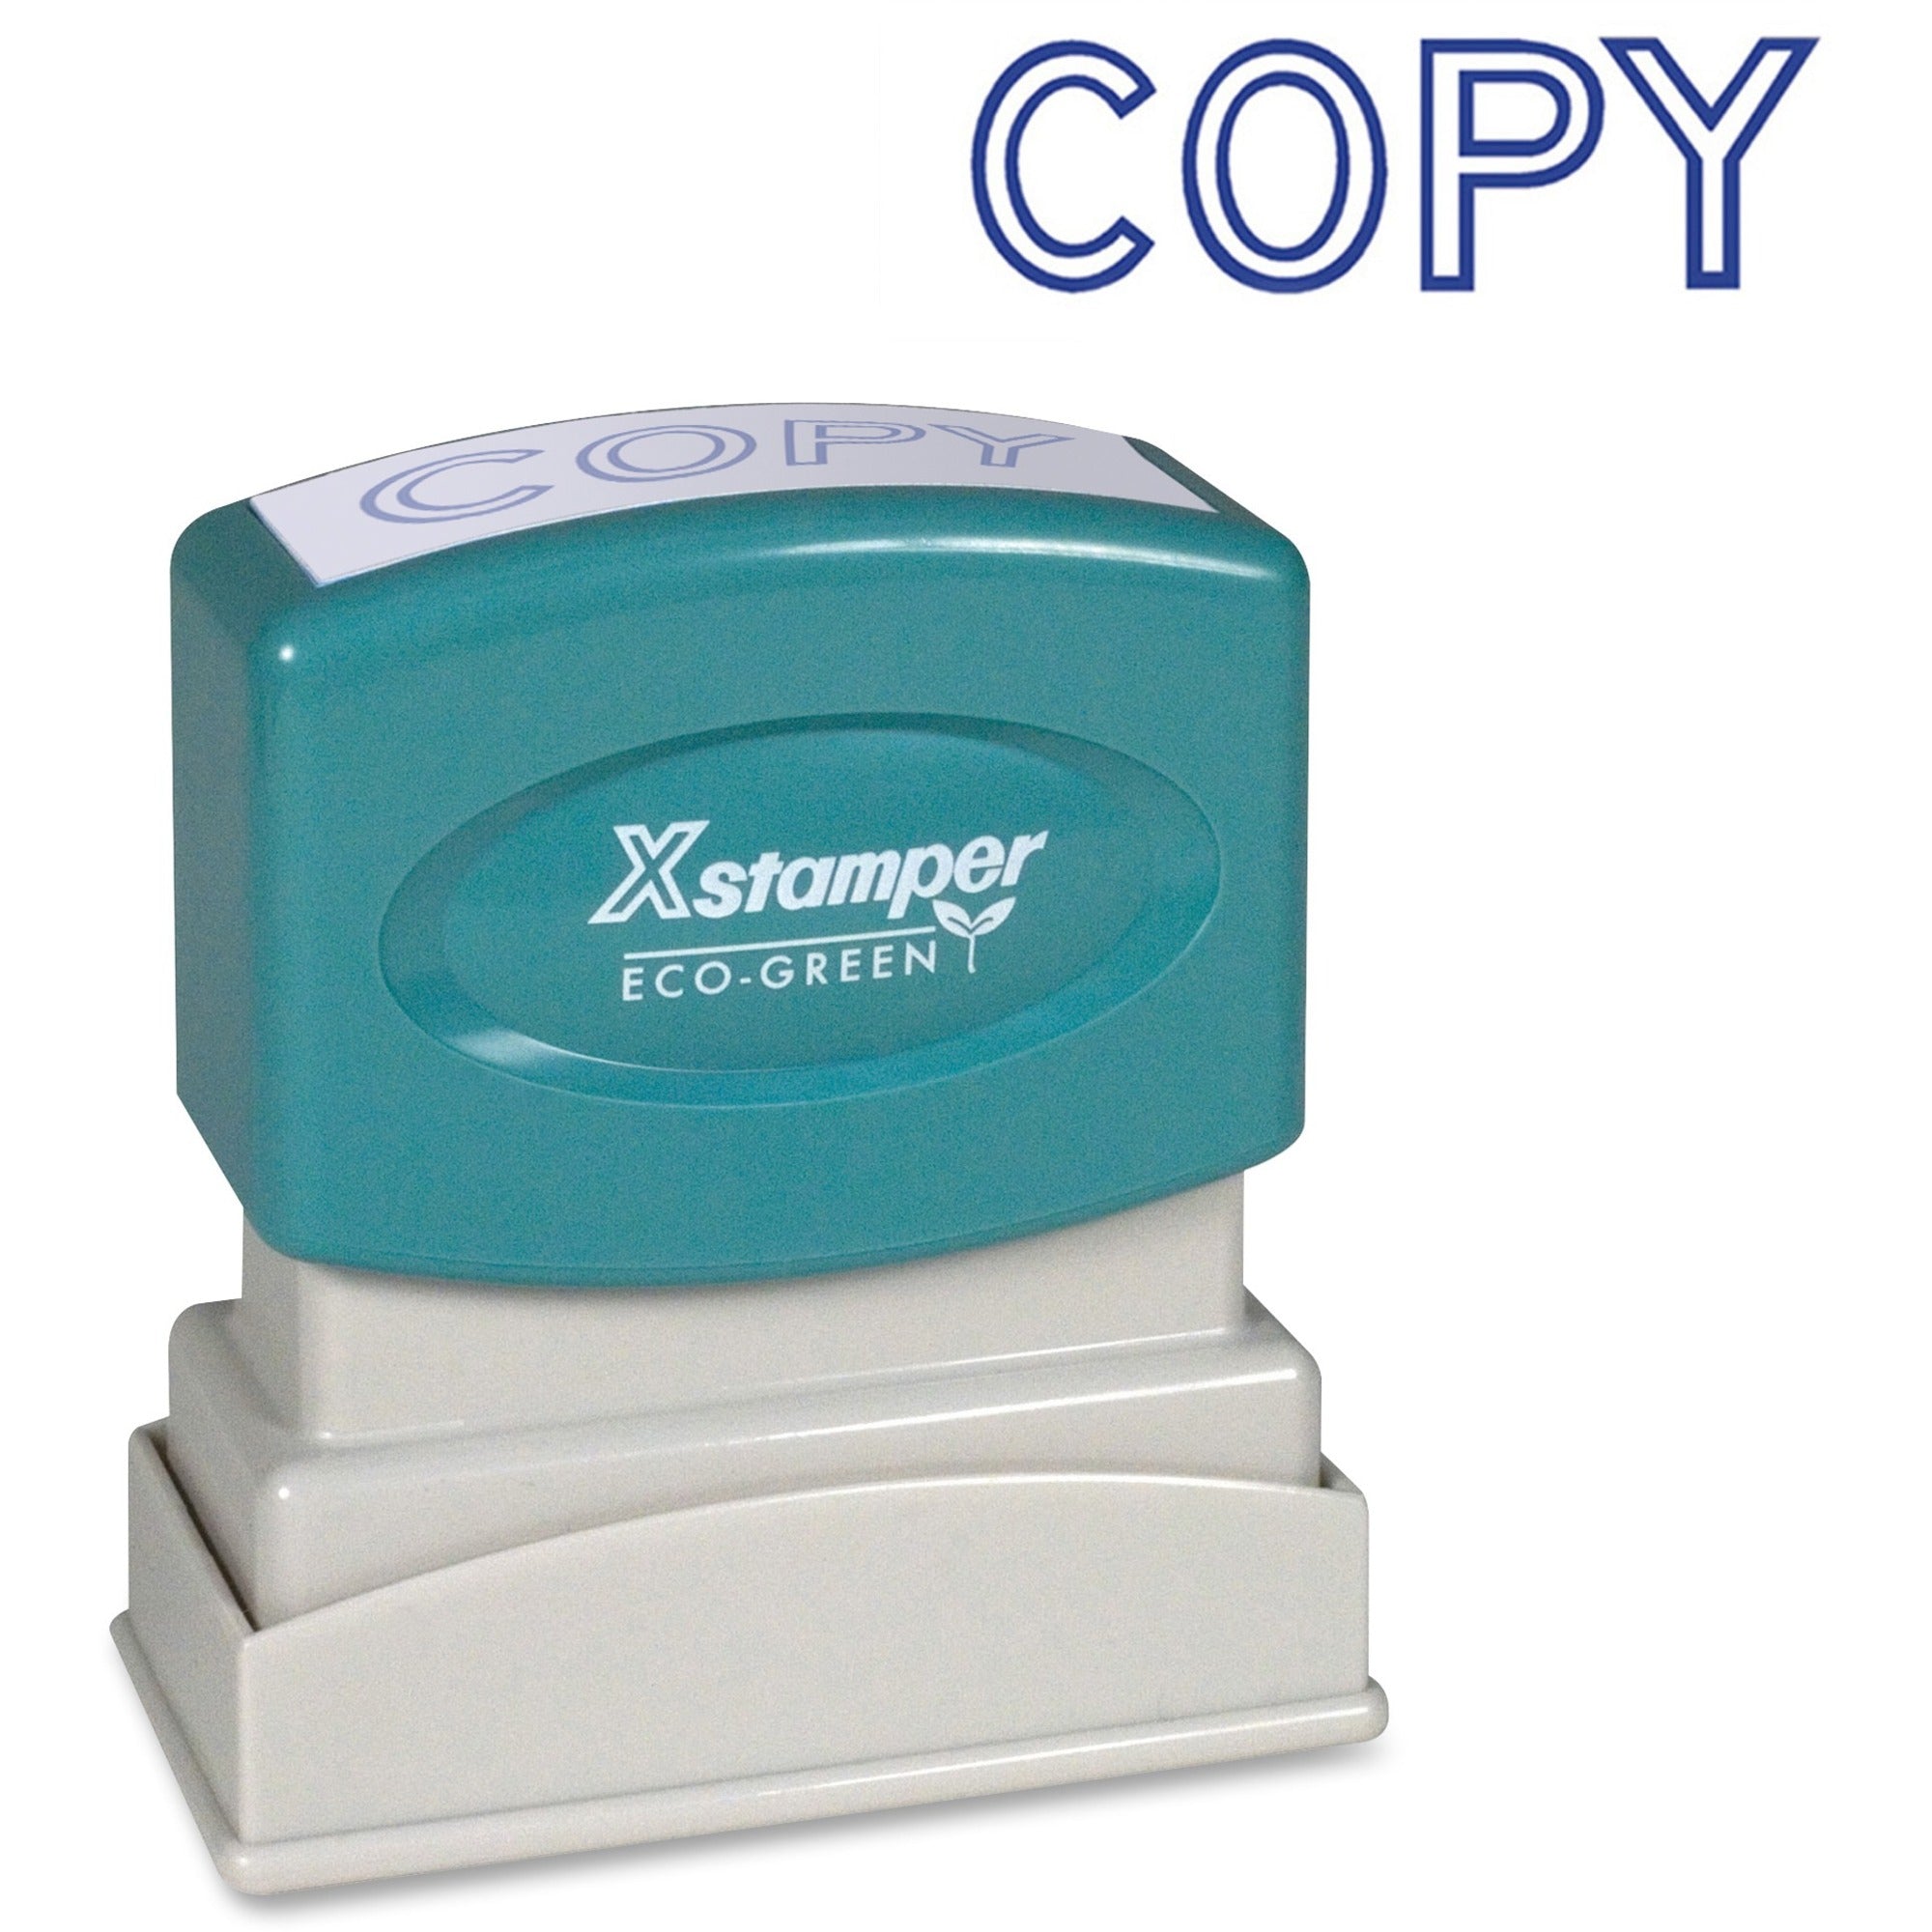 Xstamper COPY Title Stamp - Message Stamp - "COPY" - 0.50" Impression Width x 1.63" Impression Length - 100000 Impression(s) - Blue - Recycled - 1 Each - 